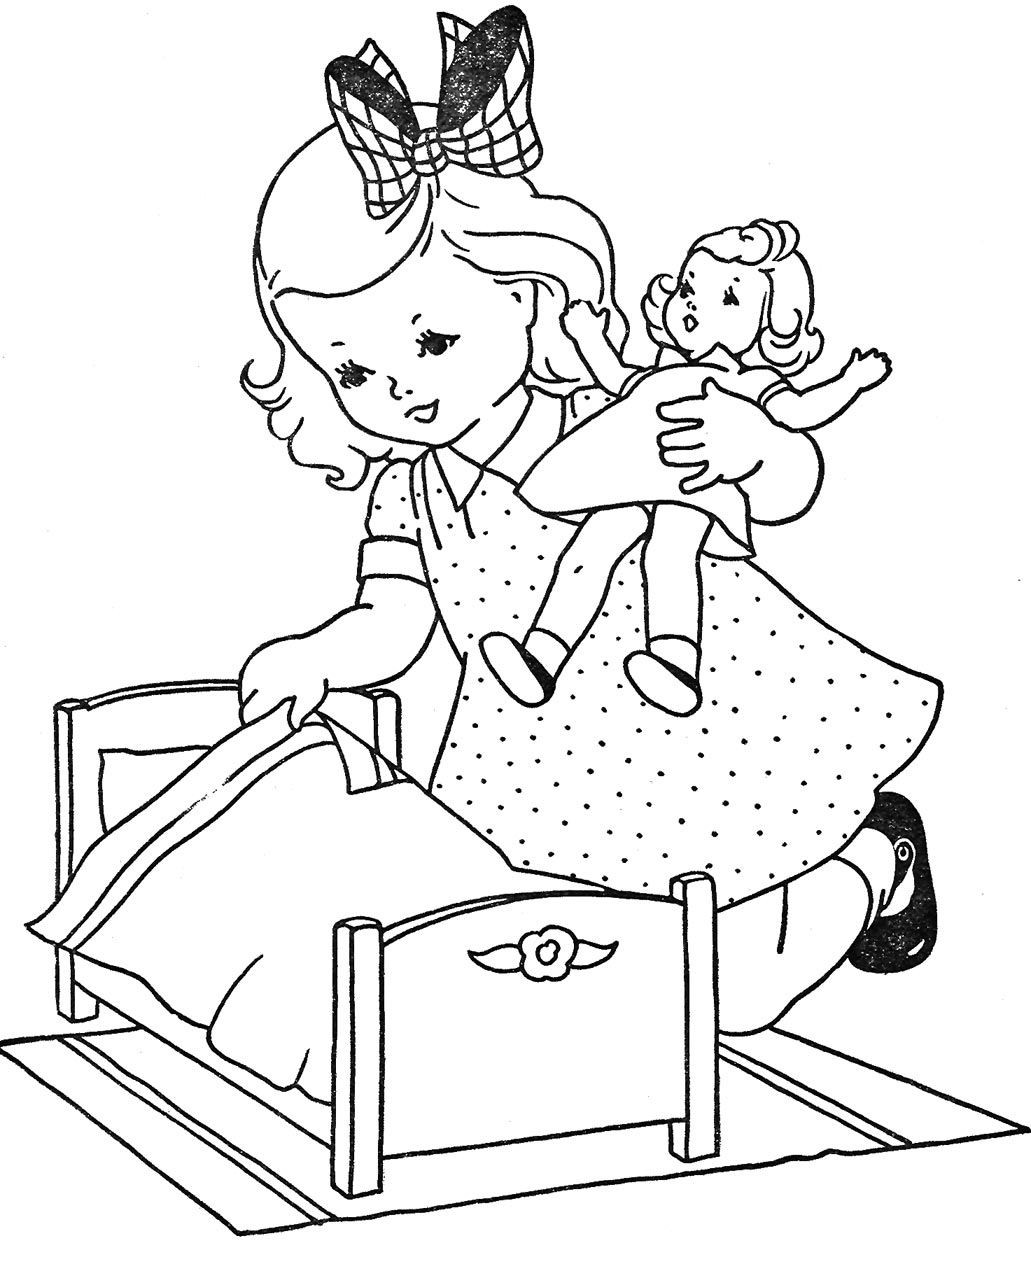 Coloring Pages For Girls And Boys
 Cute coloring pages for girls and boys Double click on